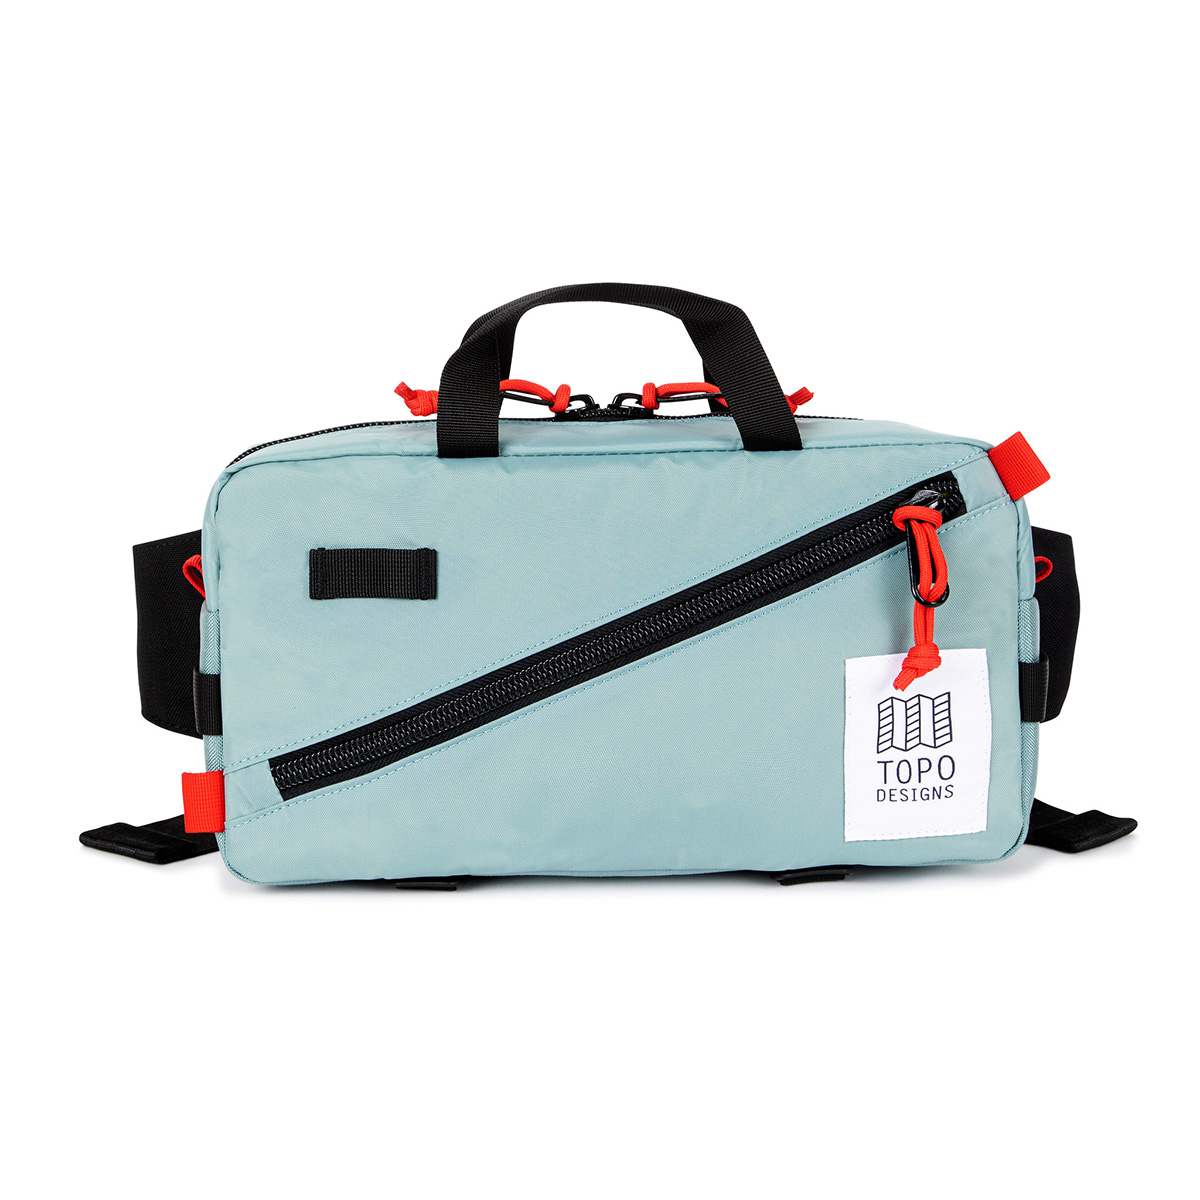 Topo Designs Quick Pack Sage, can be slung over your shoulder or worn around your waist, fanny pack style